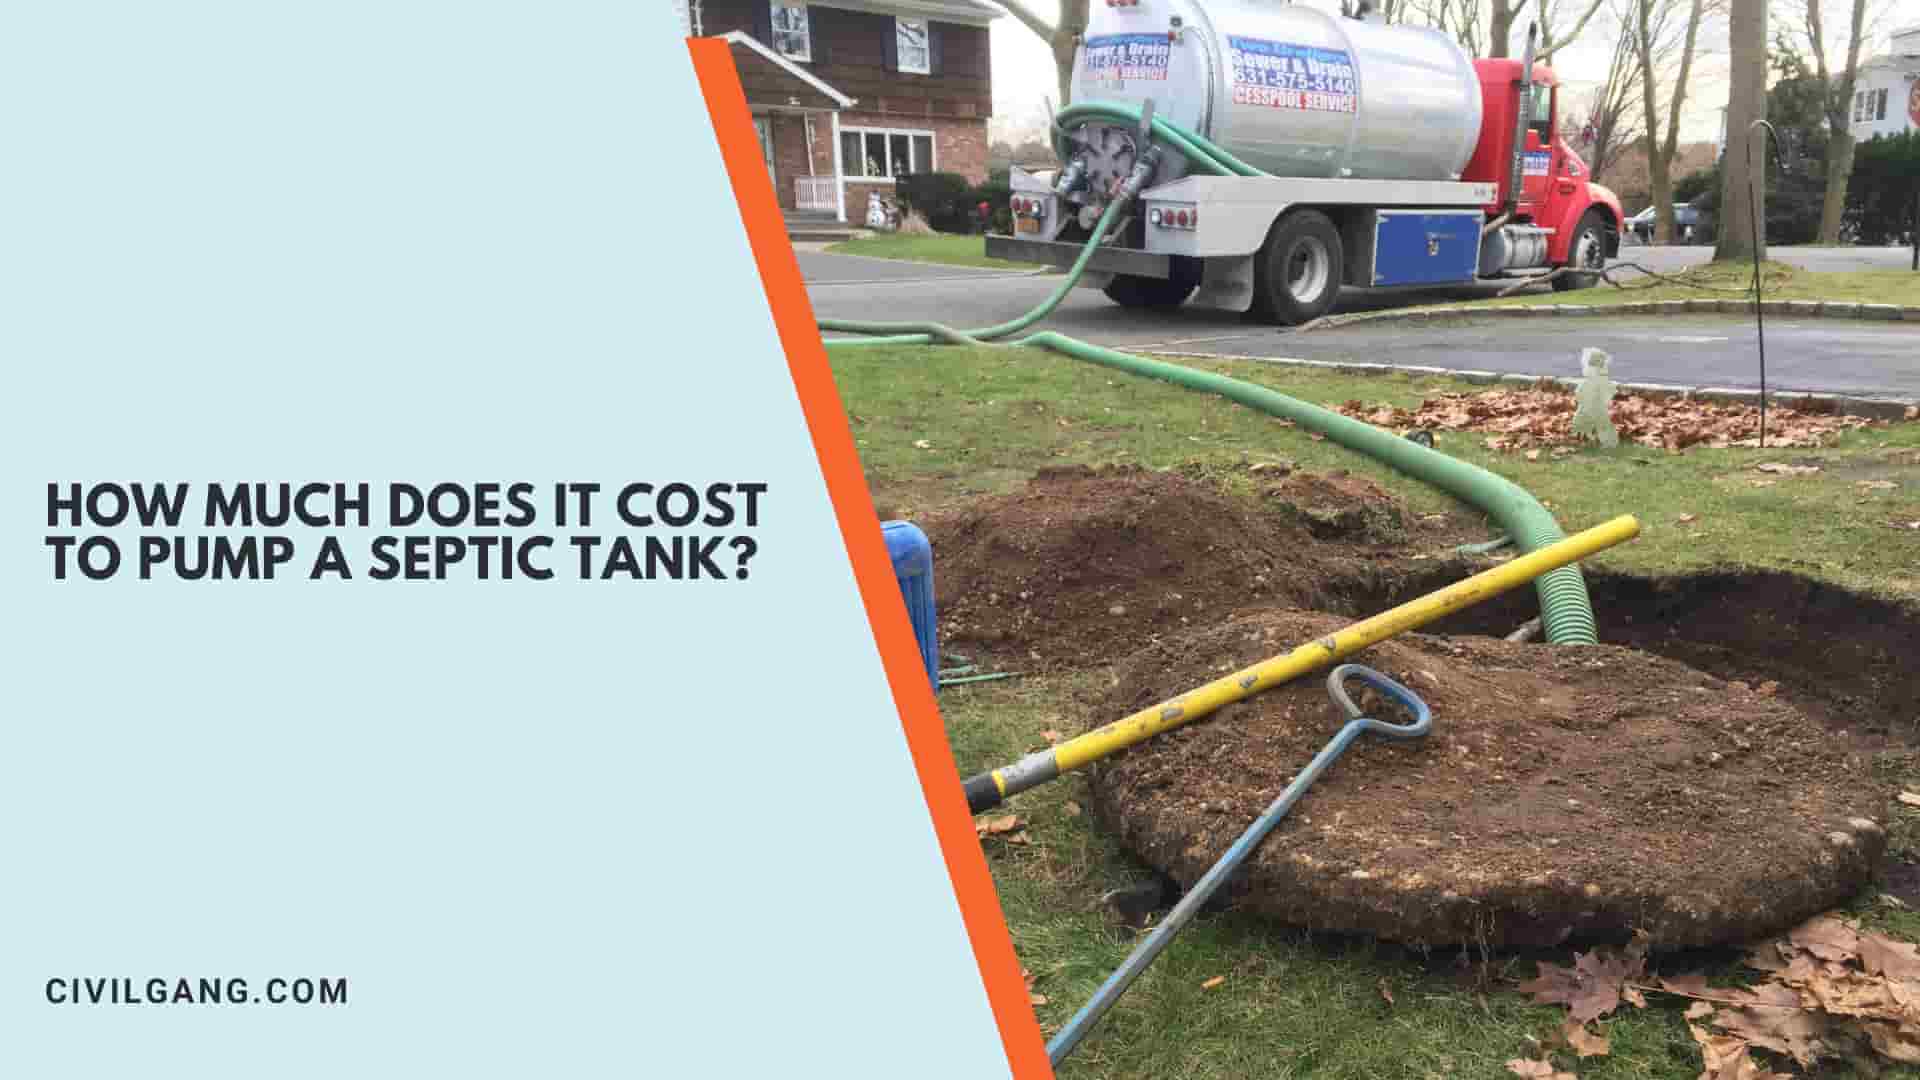 How Much Does It Cost to Pump a Septic Tank